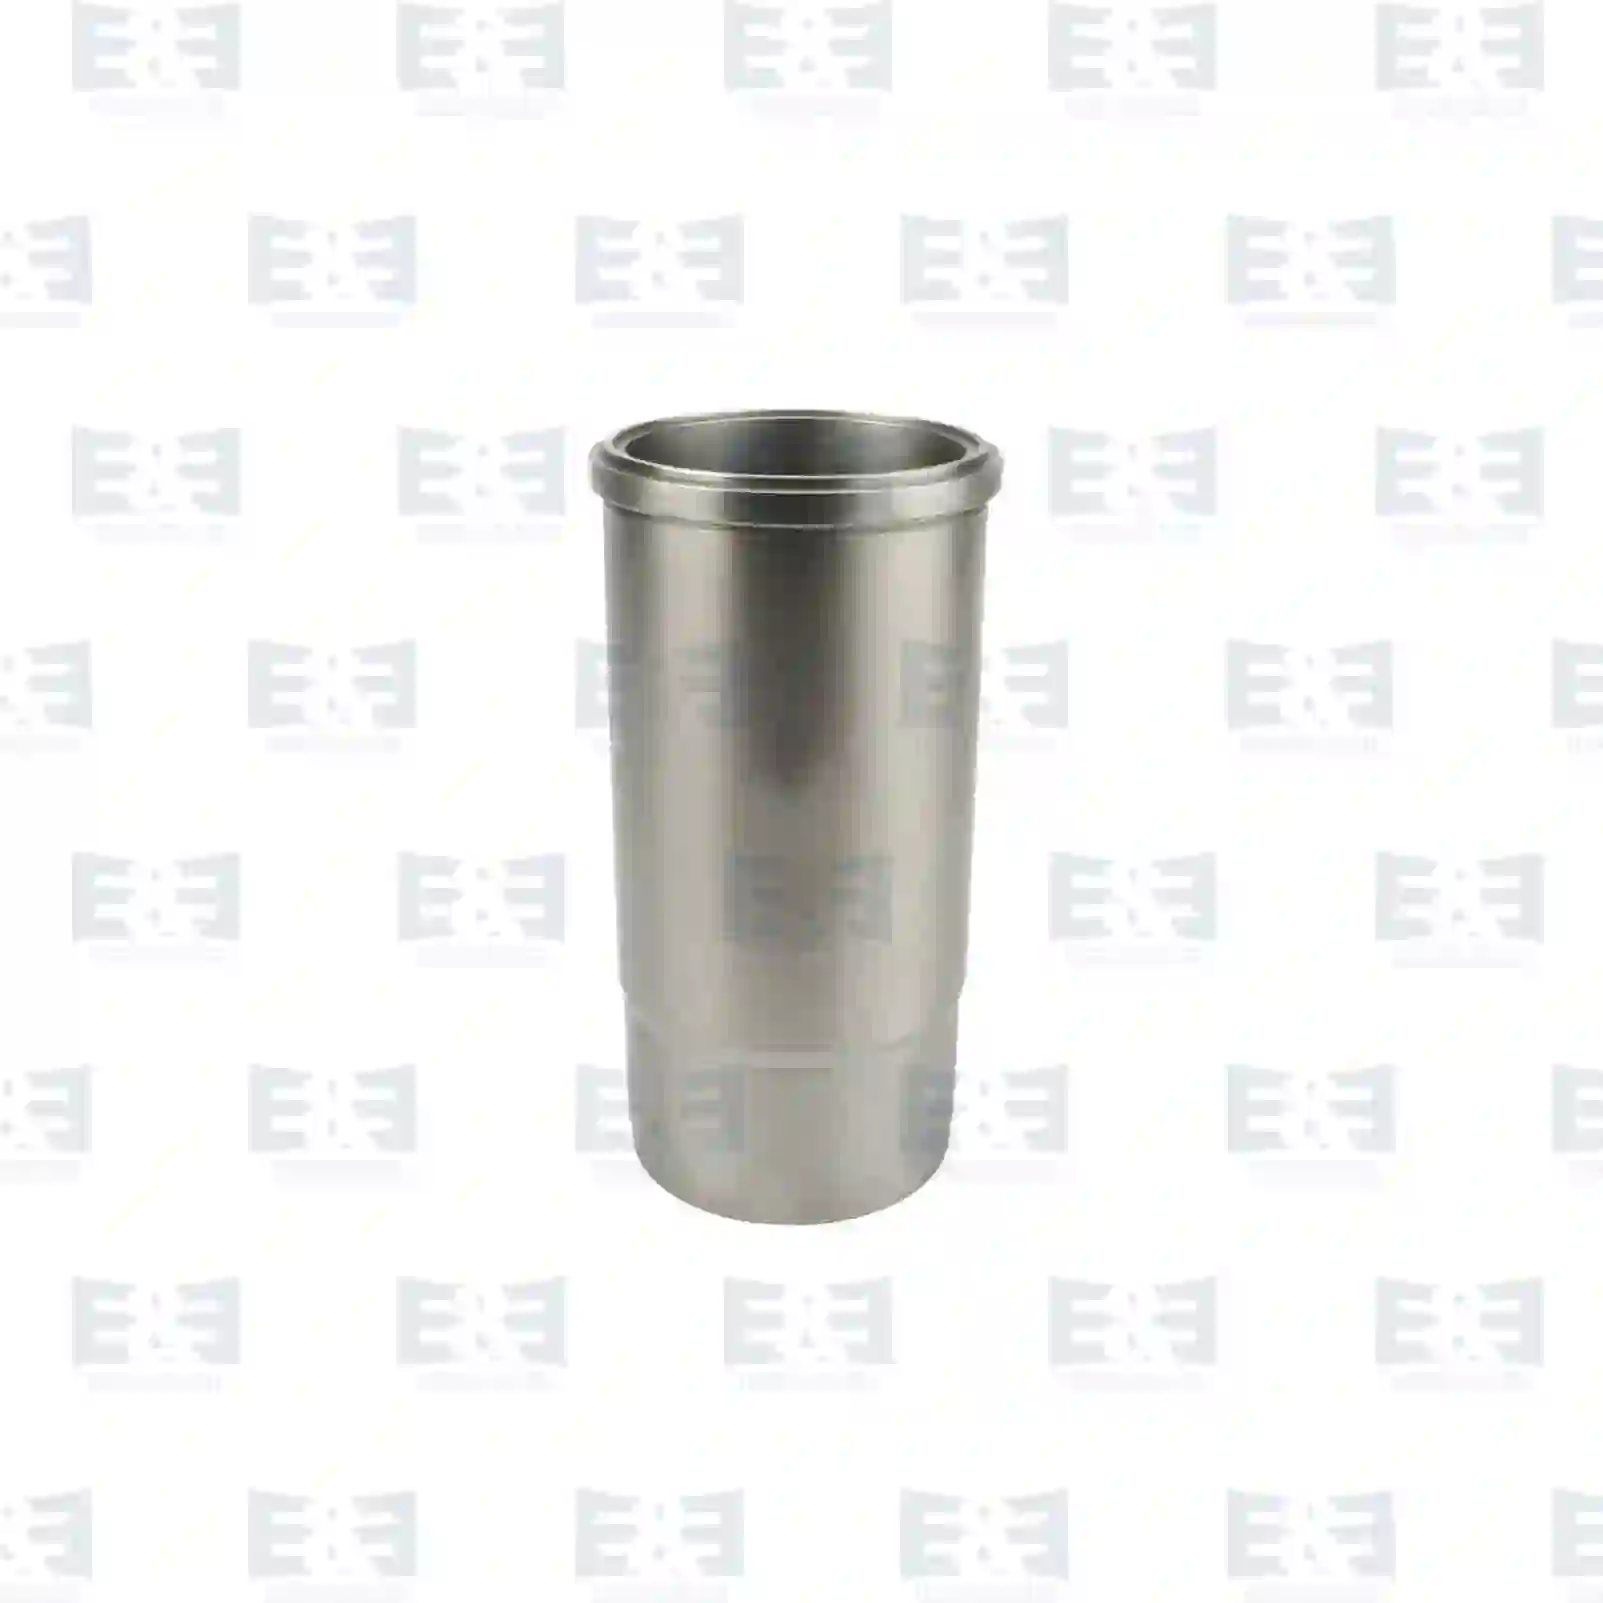 Cylinder liner, without seal rings, 2E2209505, 422840, 479200, 479201, 8194050 ||  2E2209505 E&E Truck Spare Parts | Truck Spare Parts, Auotomotive Spare Parts Cylinder liner, without seal rings, 2E2209505, 422840, 479200, 479201, 8194050 ||  2E2209505 E&E Truck Spare Parts | Truck Spare Parts, Auotomotive Spare Parts